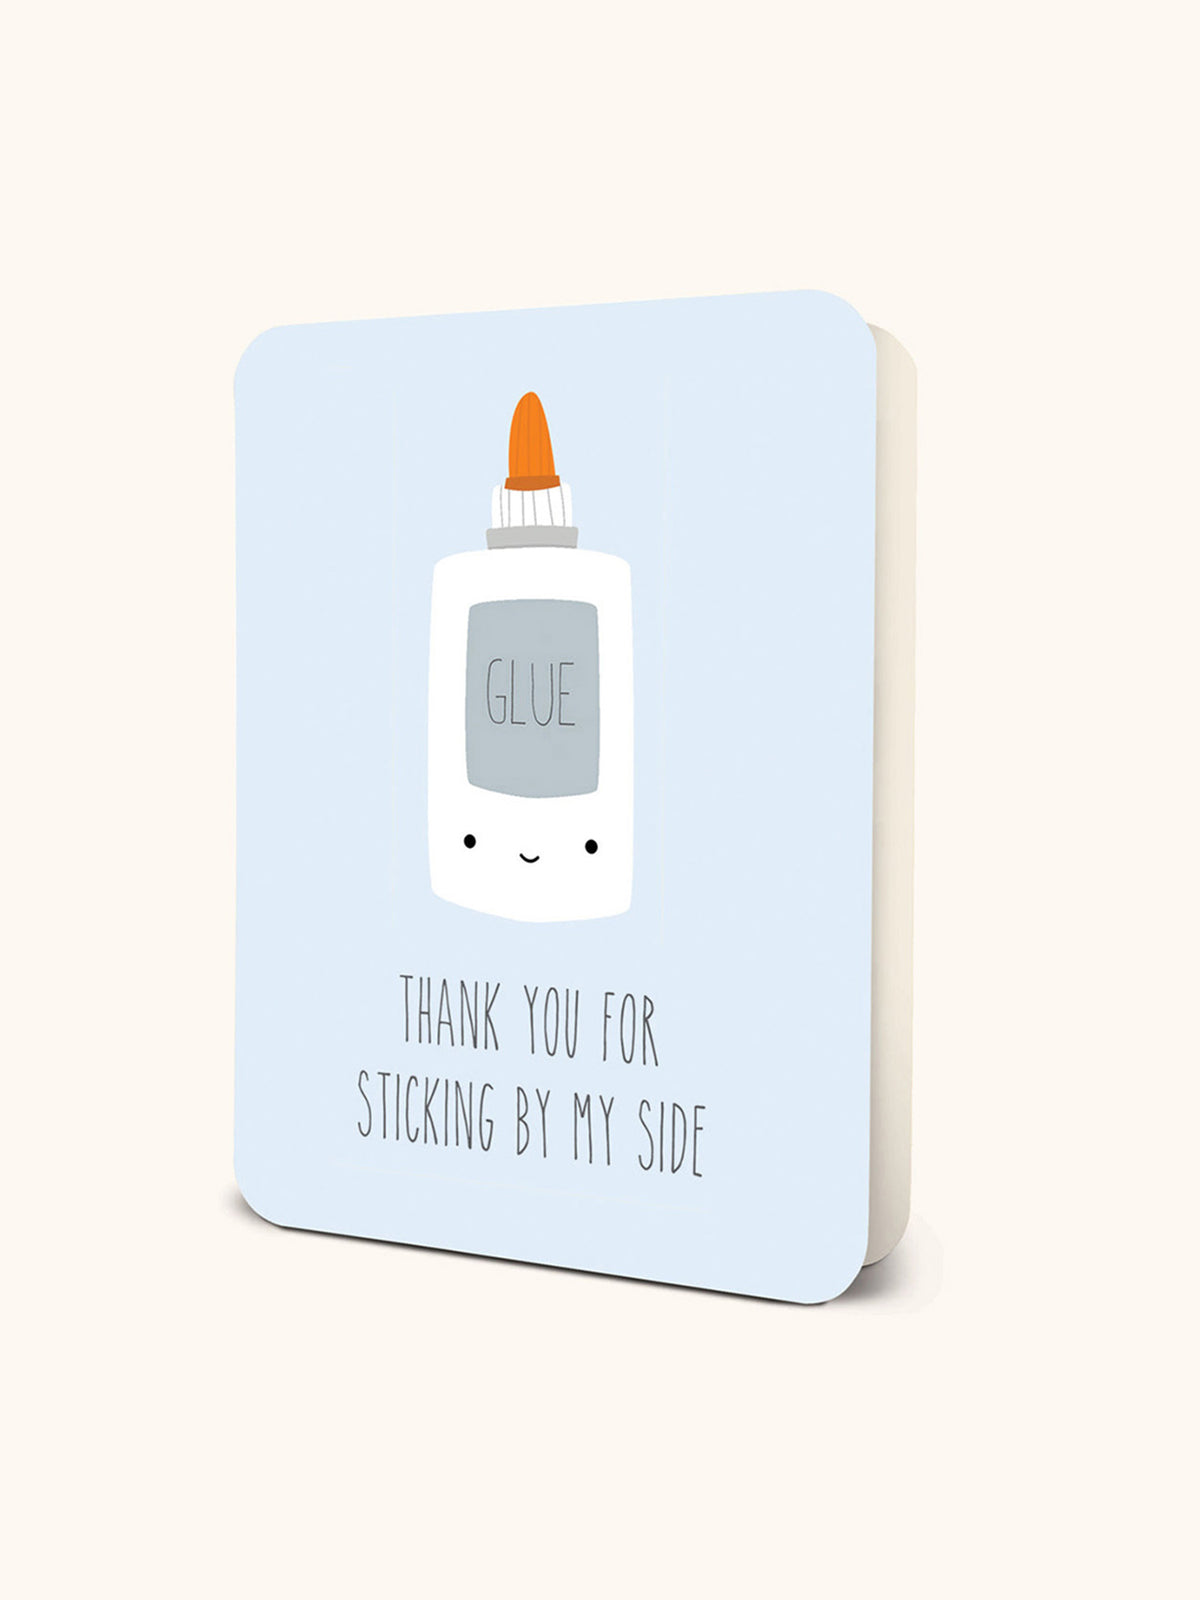 Stick By My Side Deluxe Greeting Card